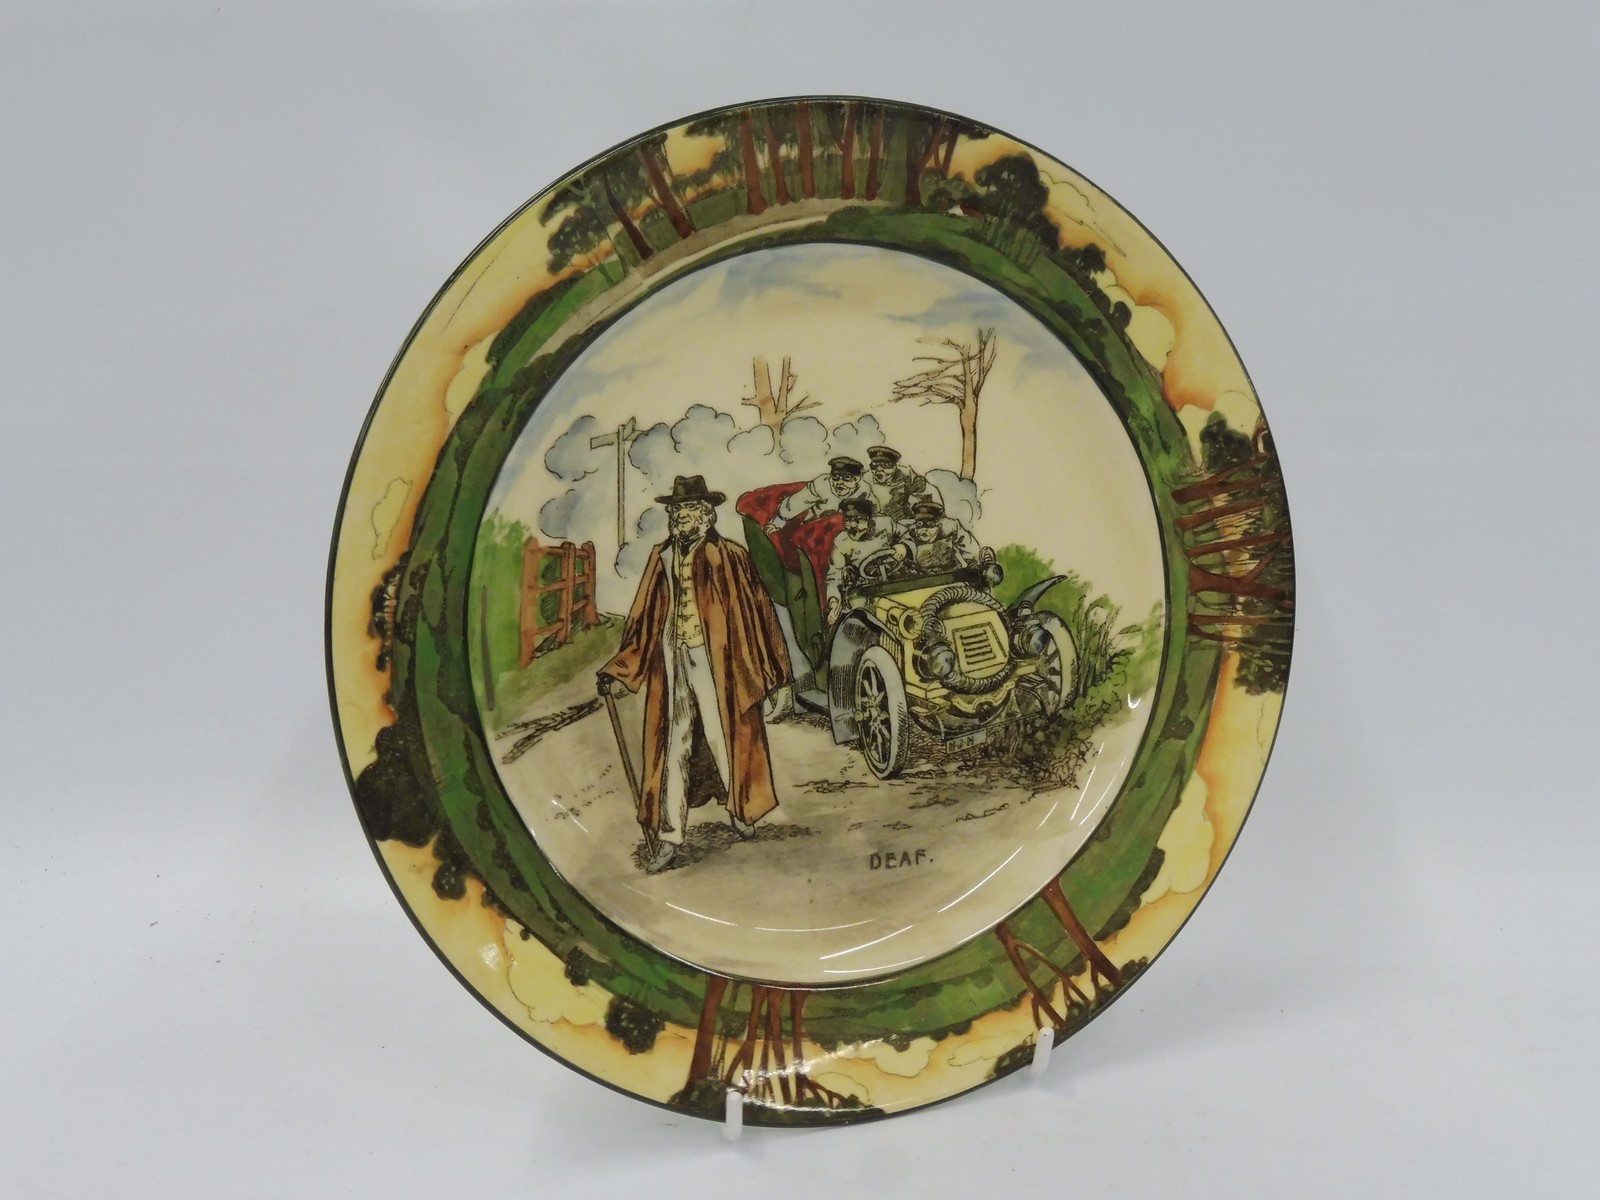 A Royal Doulton motoring themed plate titled 'Deaf', no. D2506.